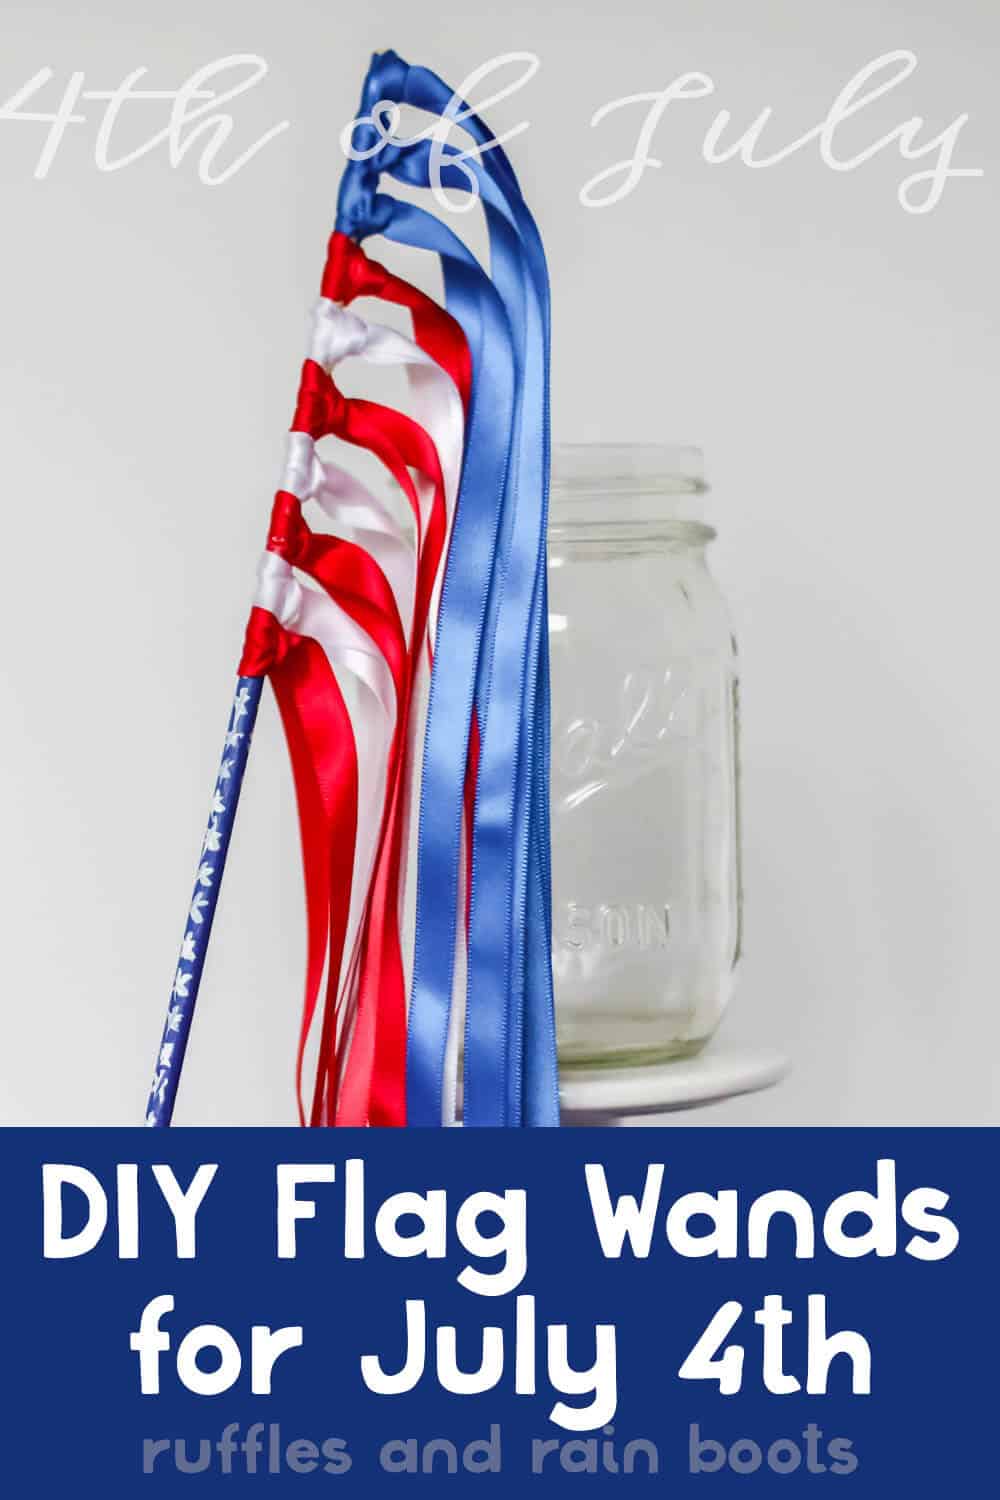 diy flag wands for independence day party leaning on a mason jar on a blue table in front of a white background with text which reads diy flag wands for july 4th